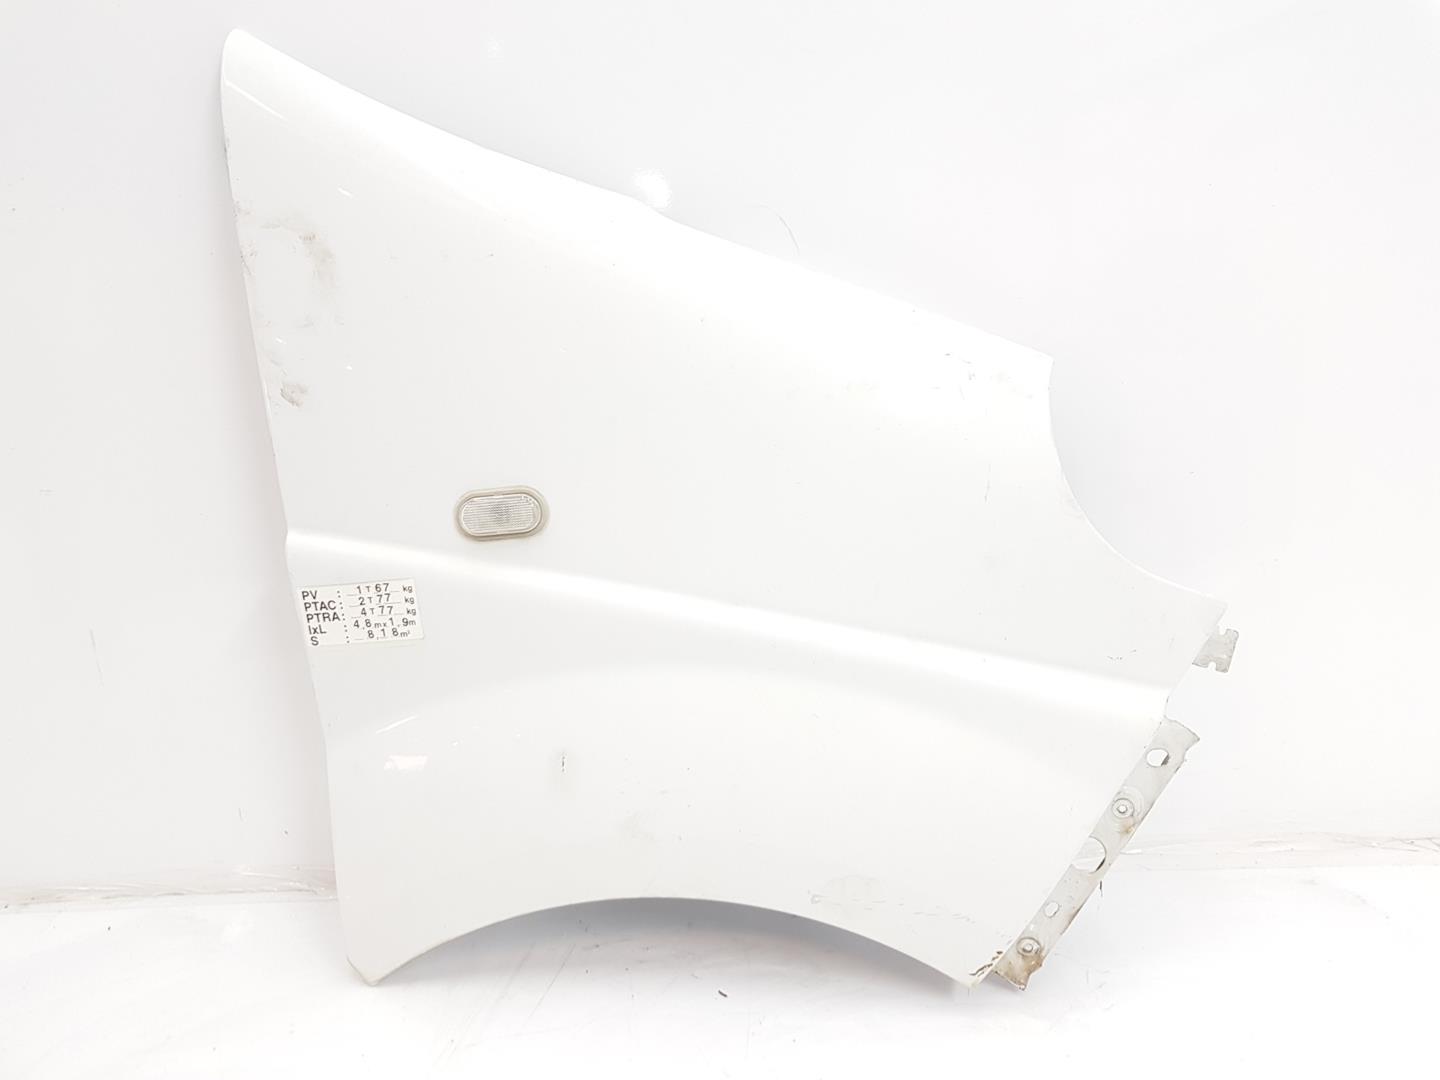 RENAULT Trafic 2 generation (2001-2015) Front Right Fender 7782524467, 7782524467, COLORBLANCO 19833051